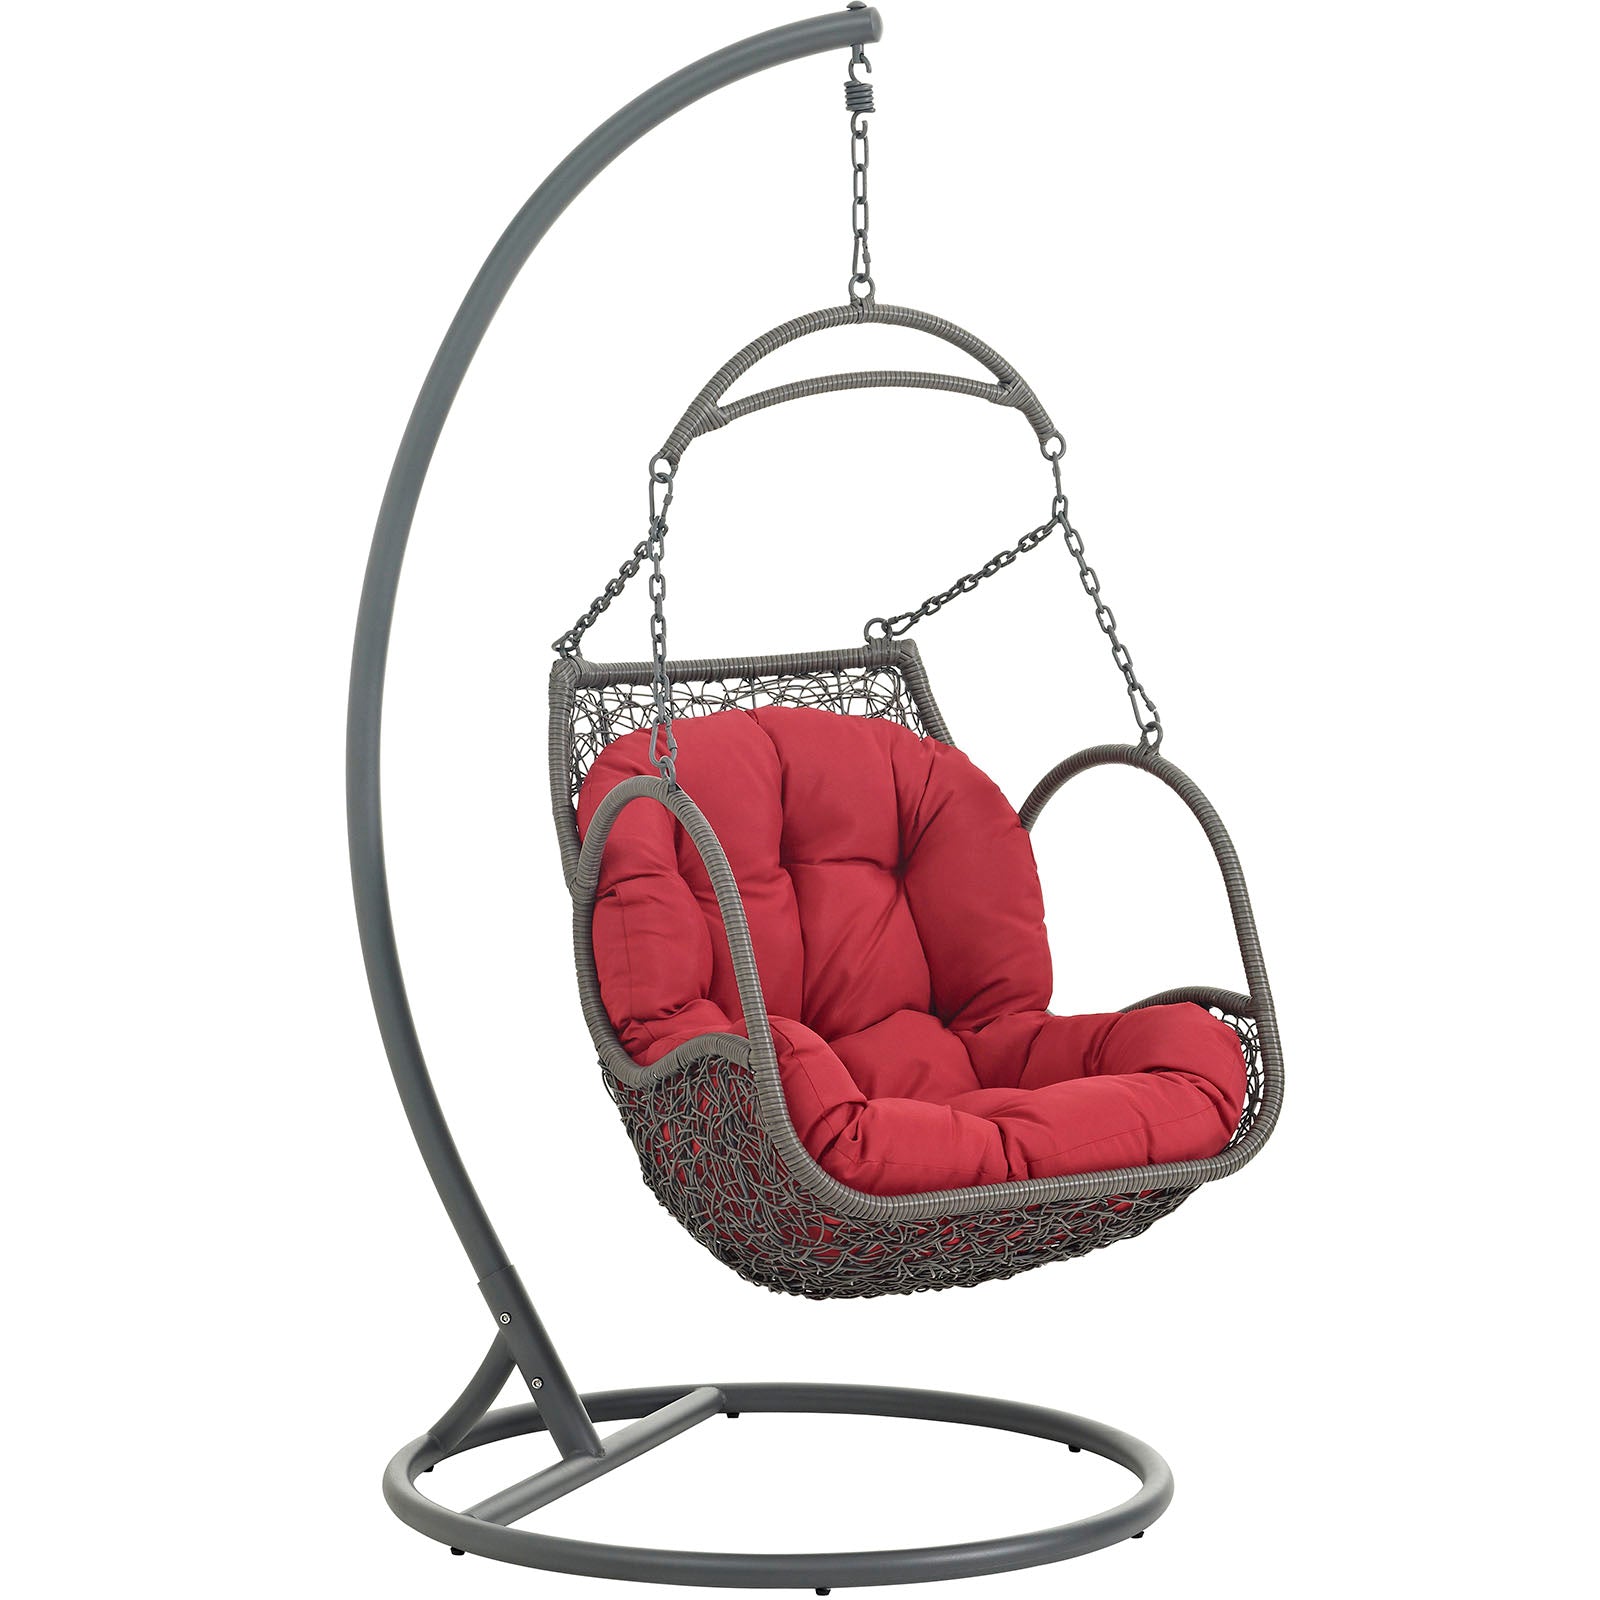 Arbor Outdoor Patio Wood Swing Chair - East Shore Modern Home Furnishings